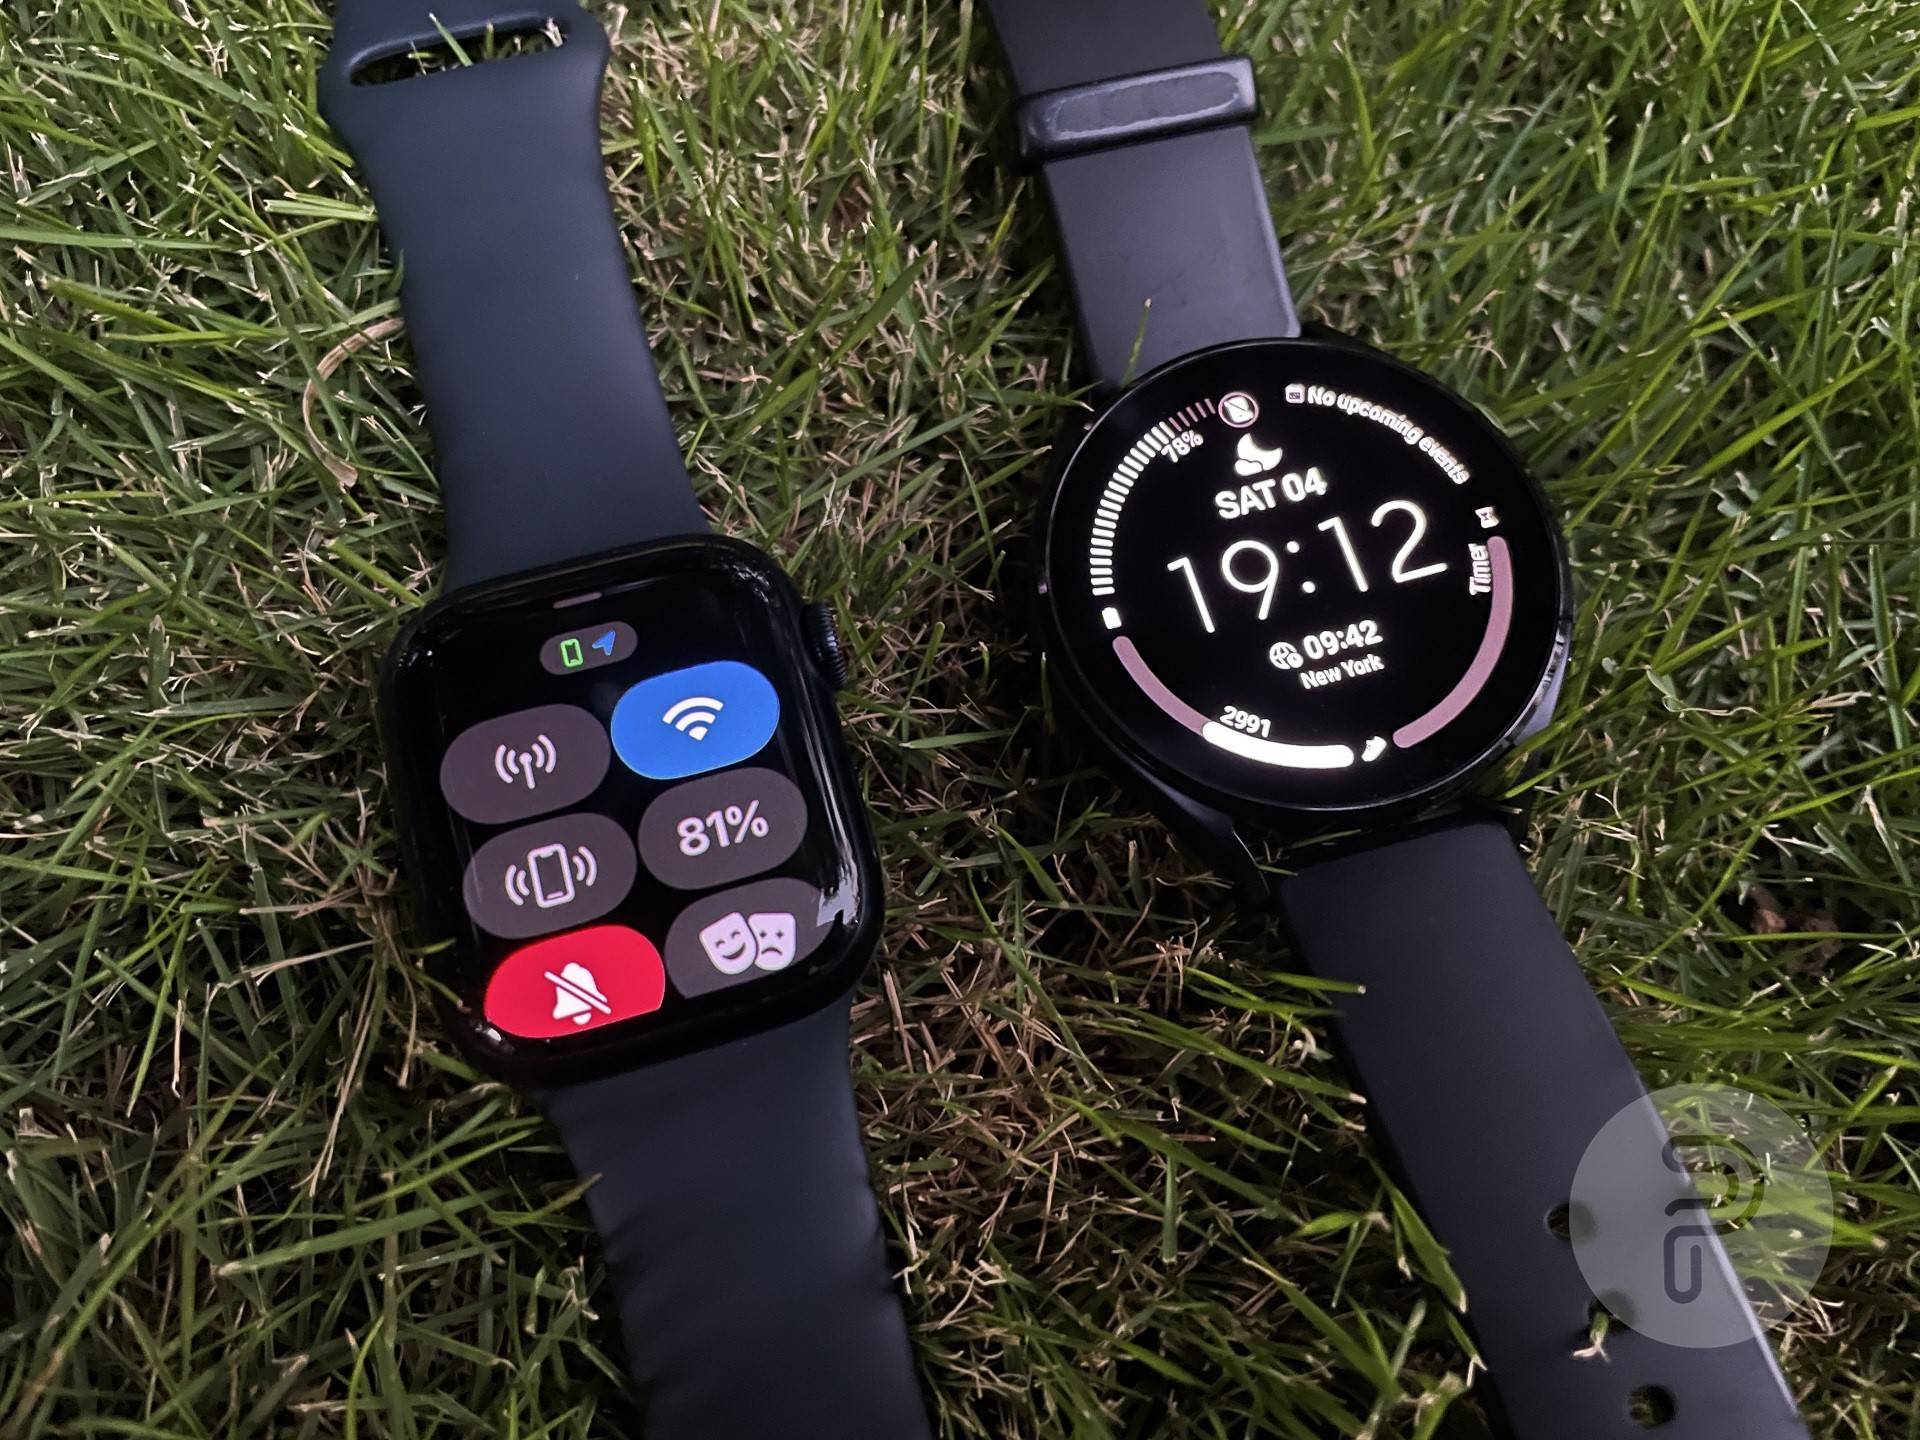 Apple Watch and Galaxy Watch placed next to each other, showing their connectivity status